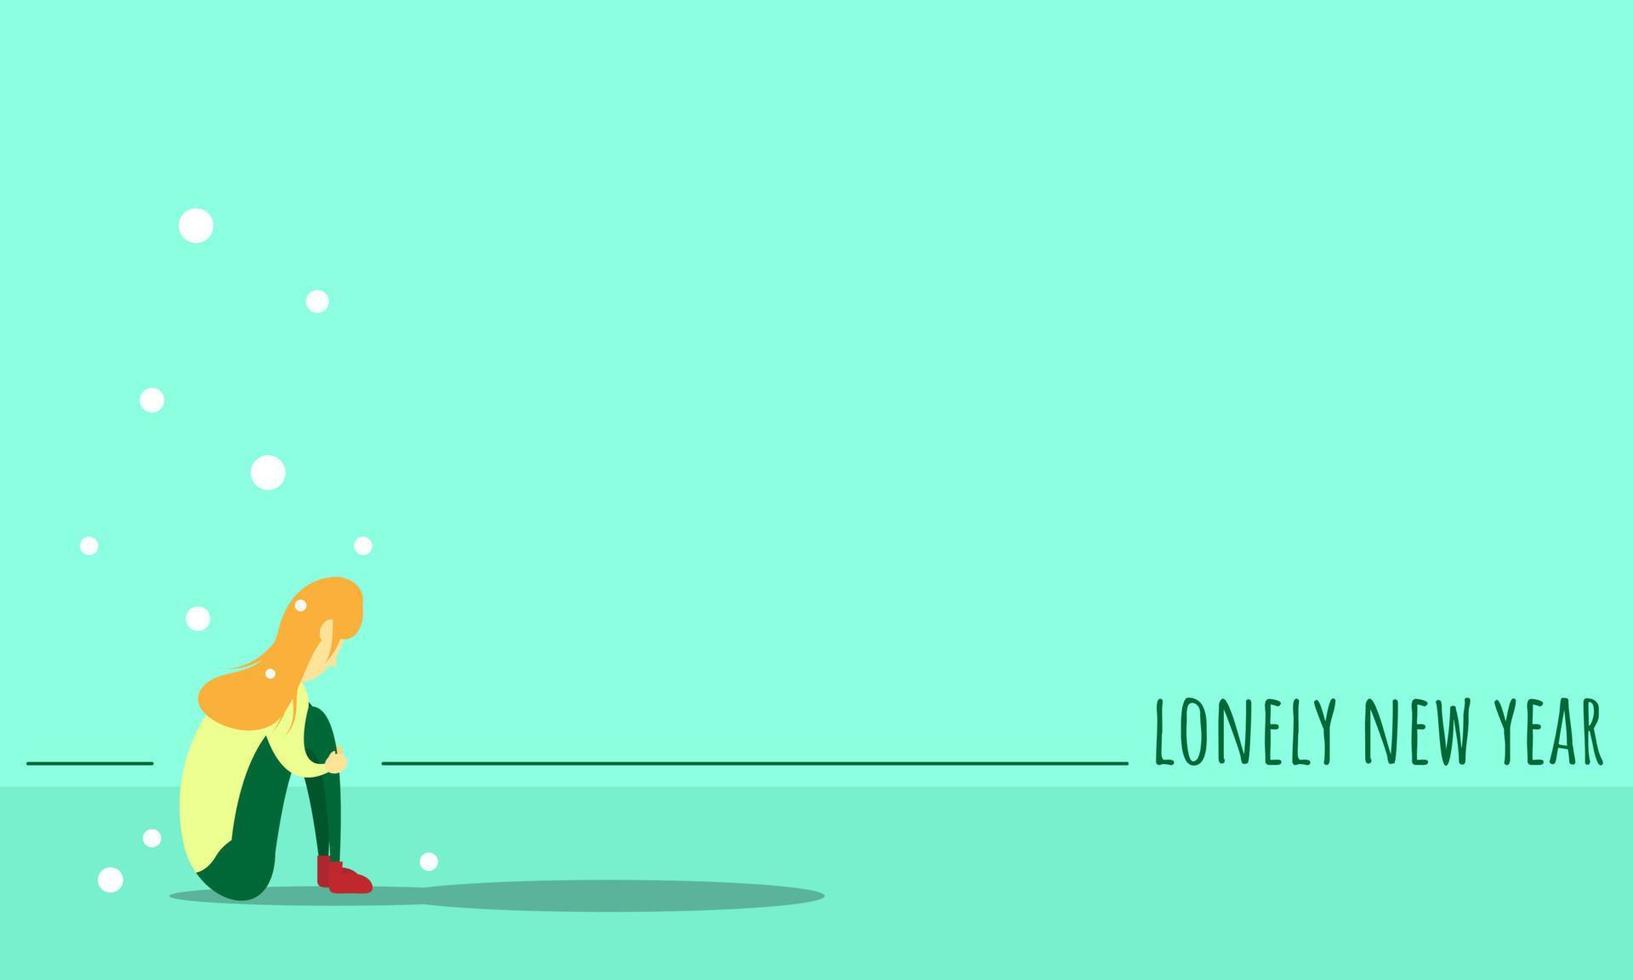 Lonely new year background and copy space area vector